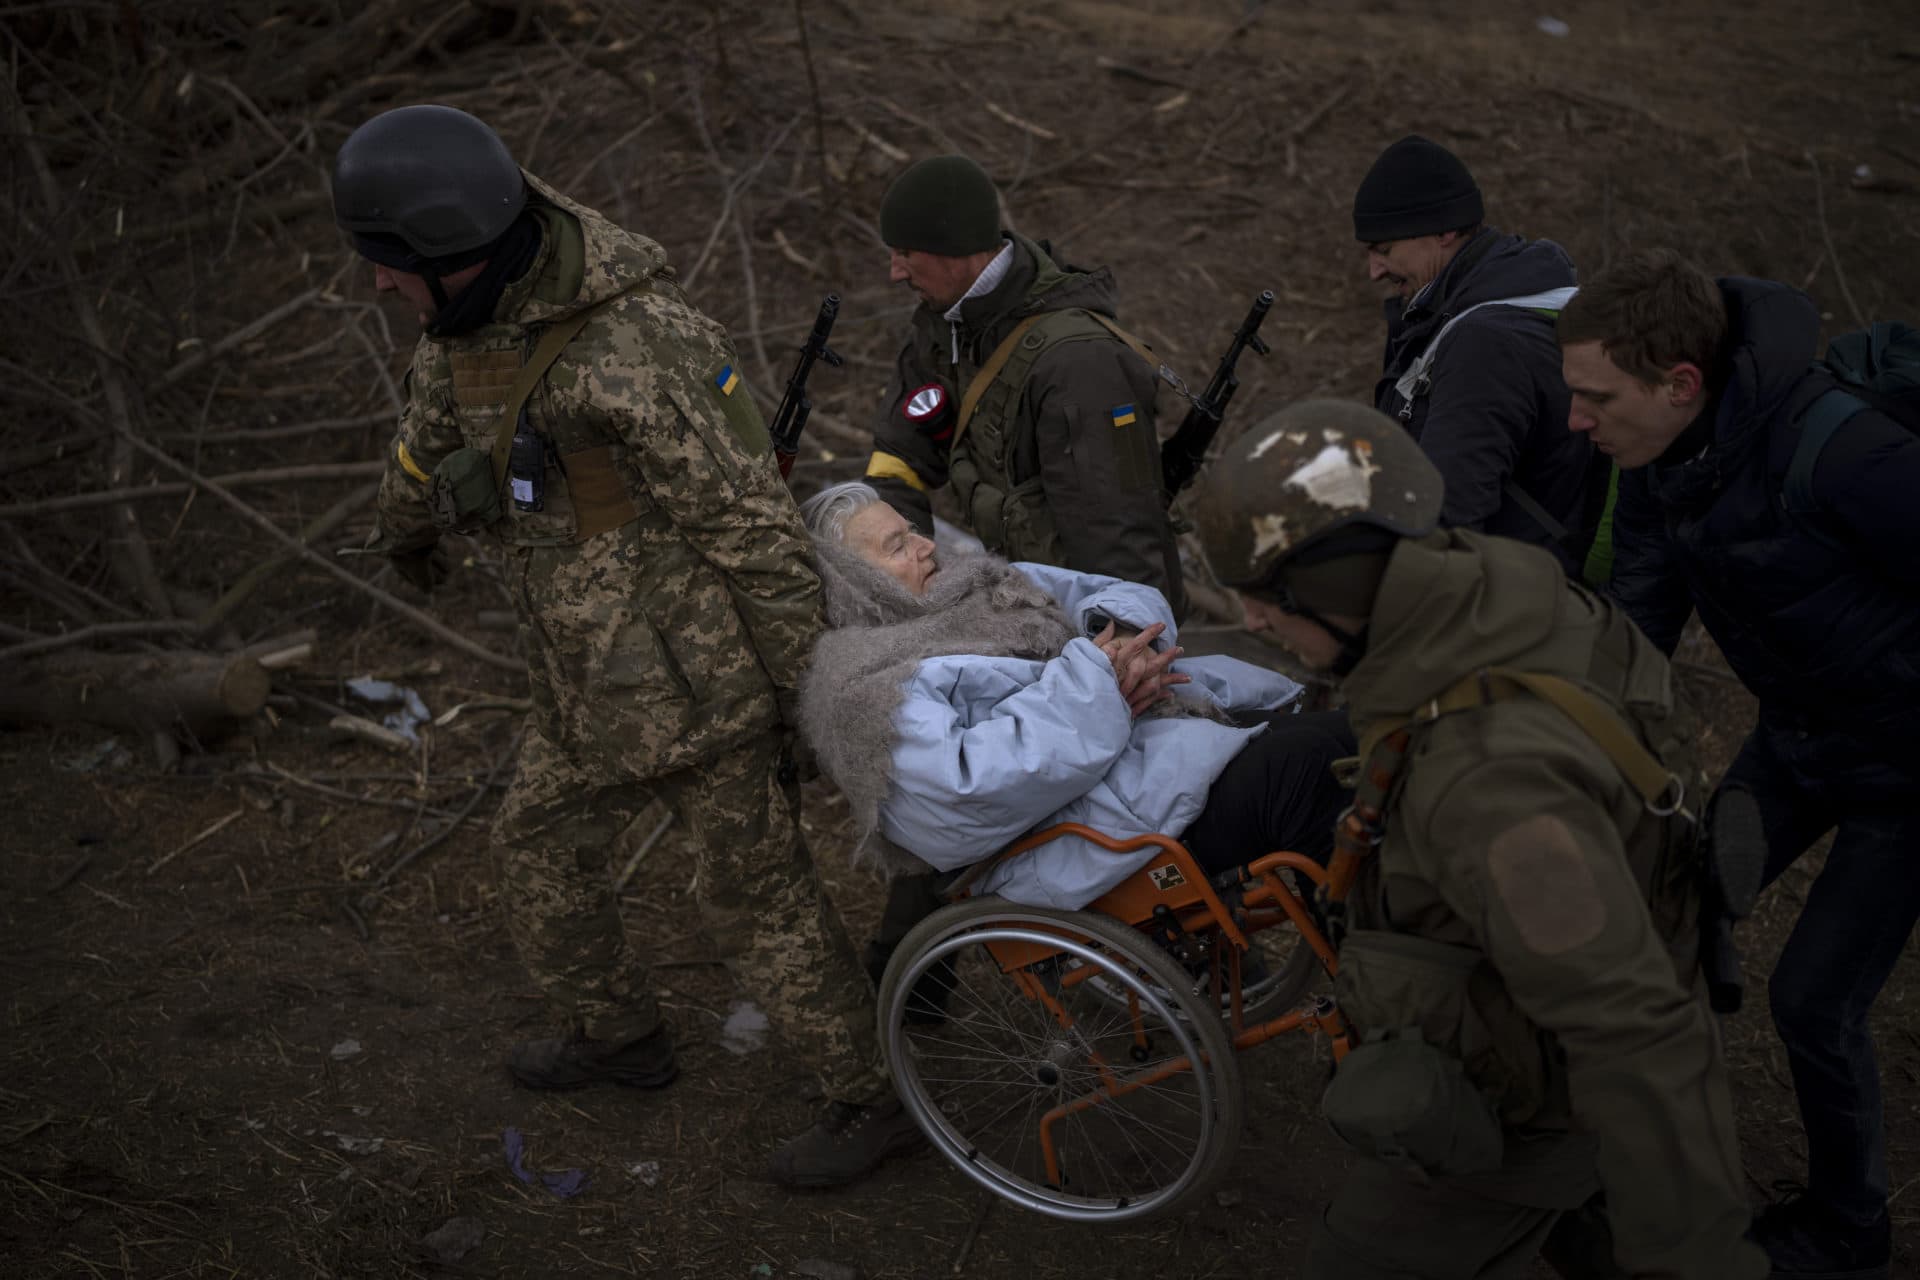 Ukrainian soldiers and militiamen carry a woman in a wheelchair as the artillery echoes nearby, while people flee Irpin on the outskirts of Kyiv, Ukraine, Monday, March 7, 2022. (Emilio Morenatti/AP)